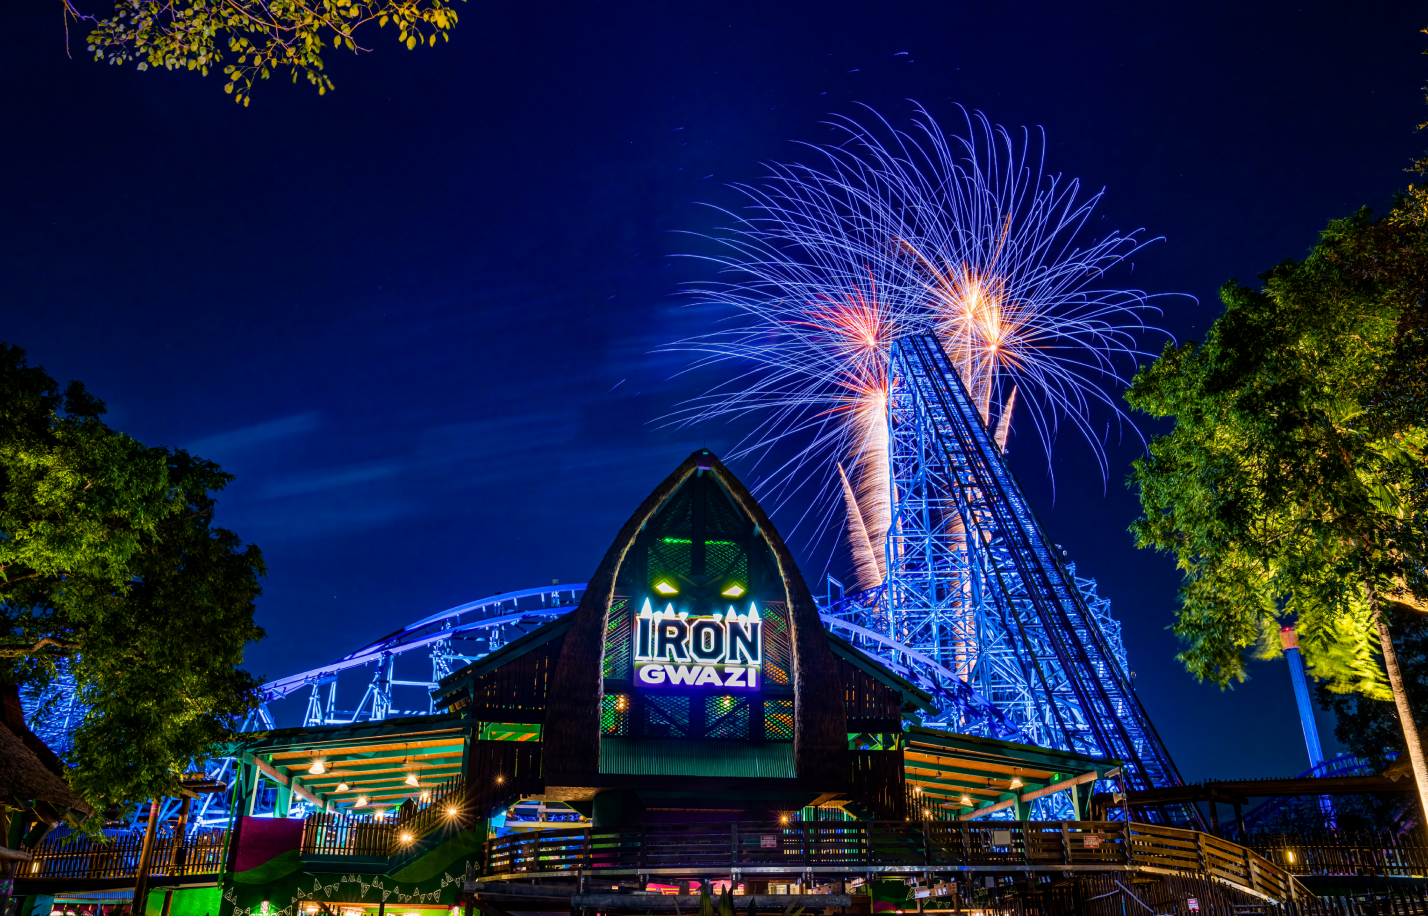 https://buschgardens.com/tampa/-/media/migrated-media/busch-gardens-tampa/images/events/summer-celebration/2022/714x458/714x458_bgt_events_summercelebration_fireworks.jpg?h=916&w=1428&la=en&hash=06650E00A2E2A019B4907653974C4D67